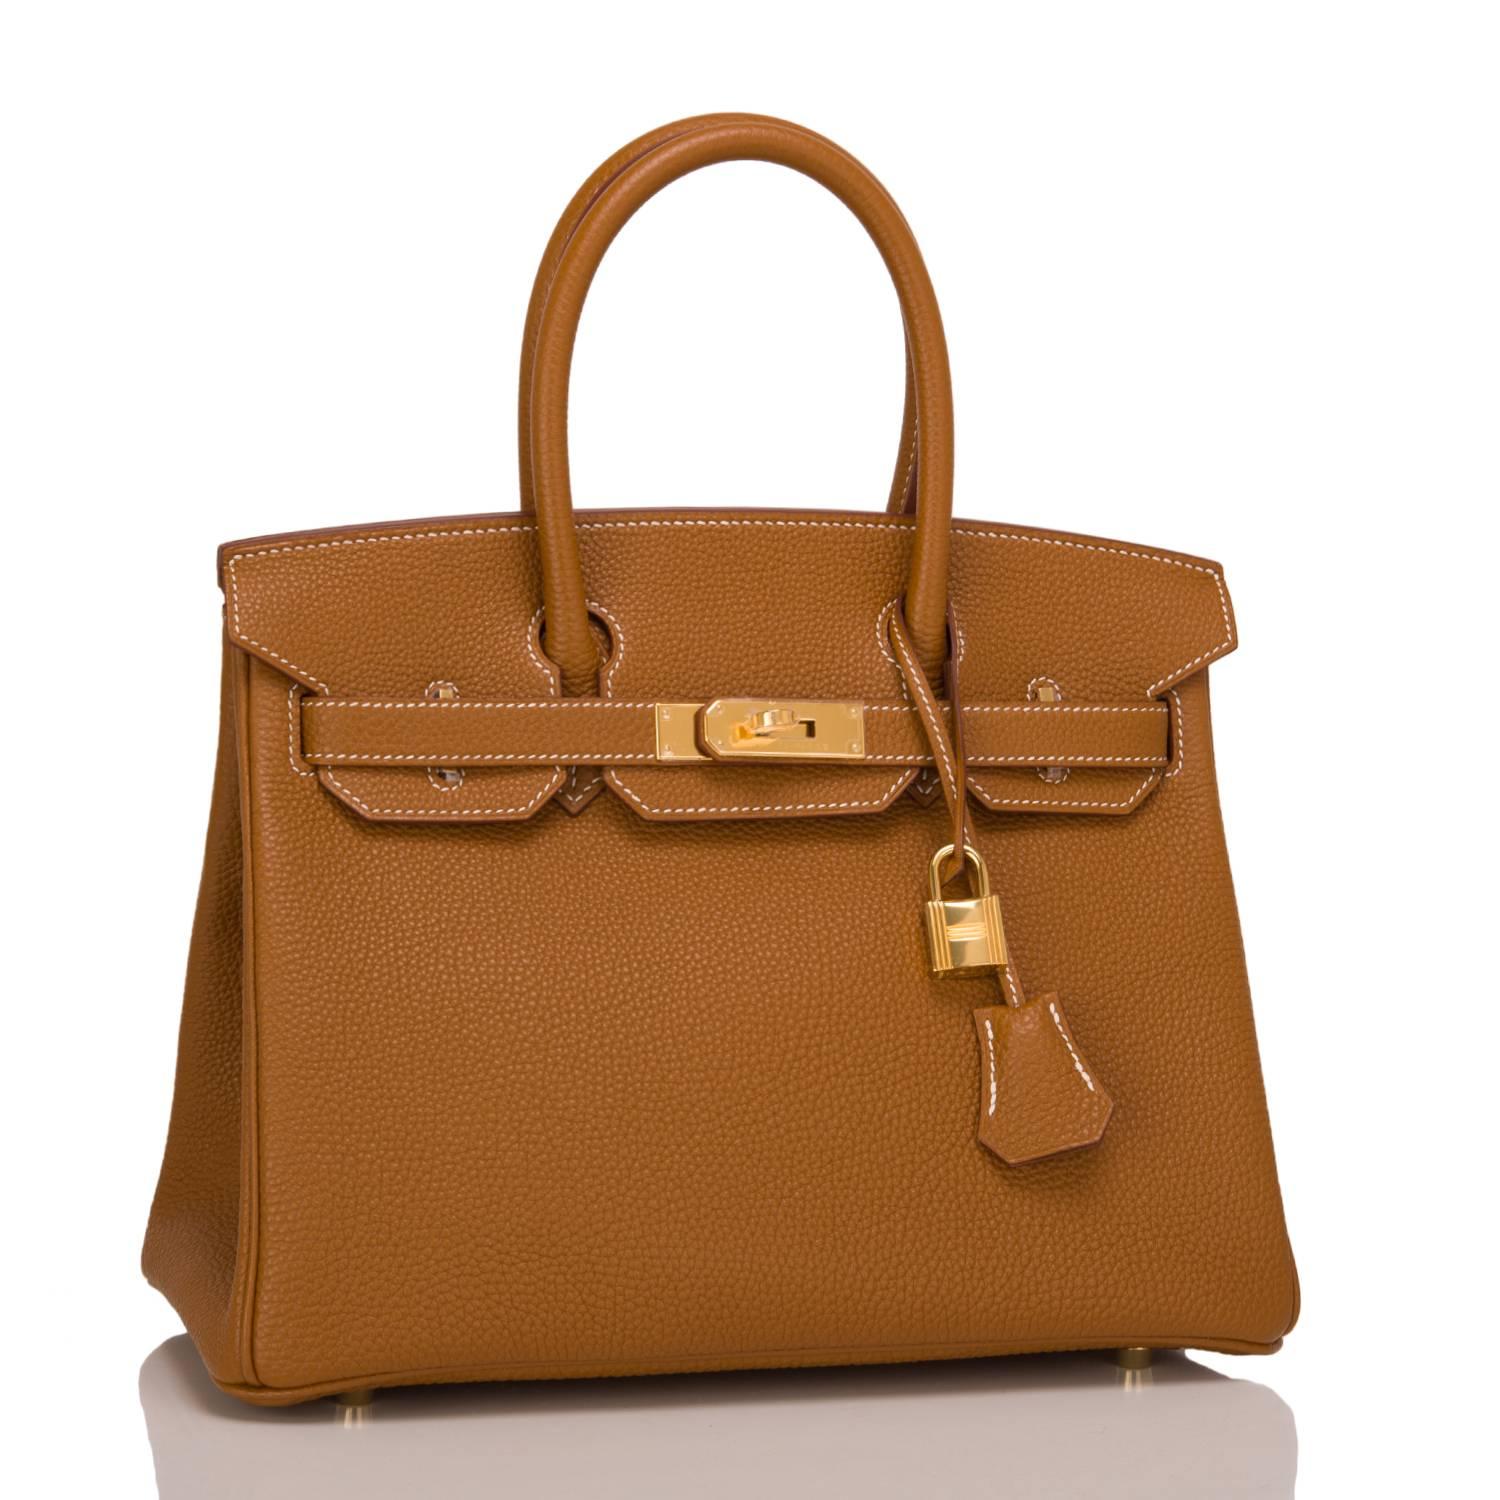 Hermes Gold Birkin 30cm in togo leather with gold hardware.

This Birkin features white contrast stitching, a front toggle closure, a clochette with lock and two keys, and double rolled handles.

The interior is lined with Gold chevre and has